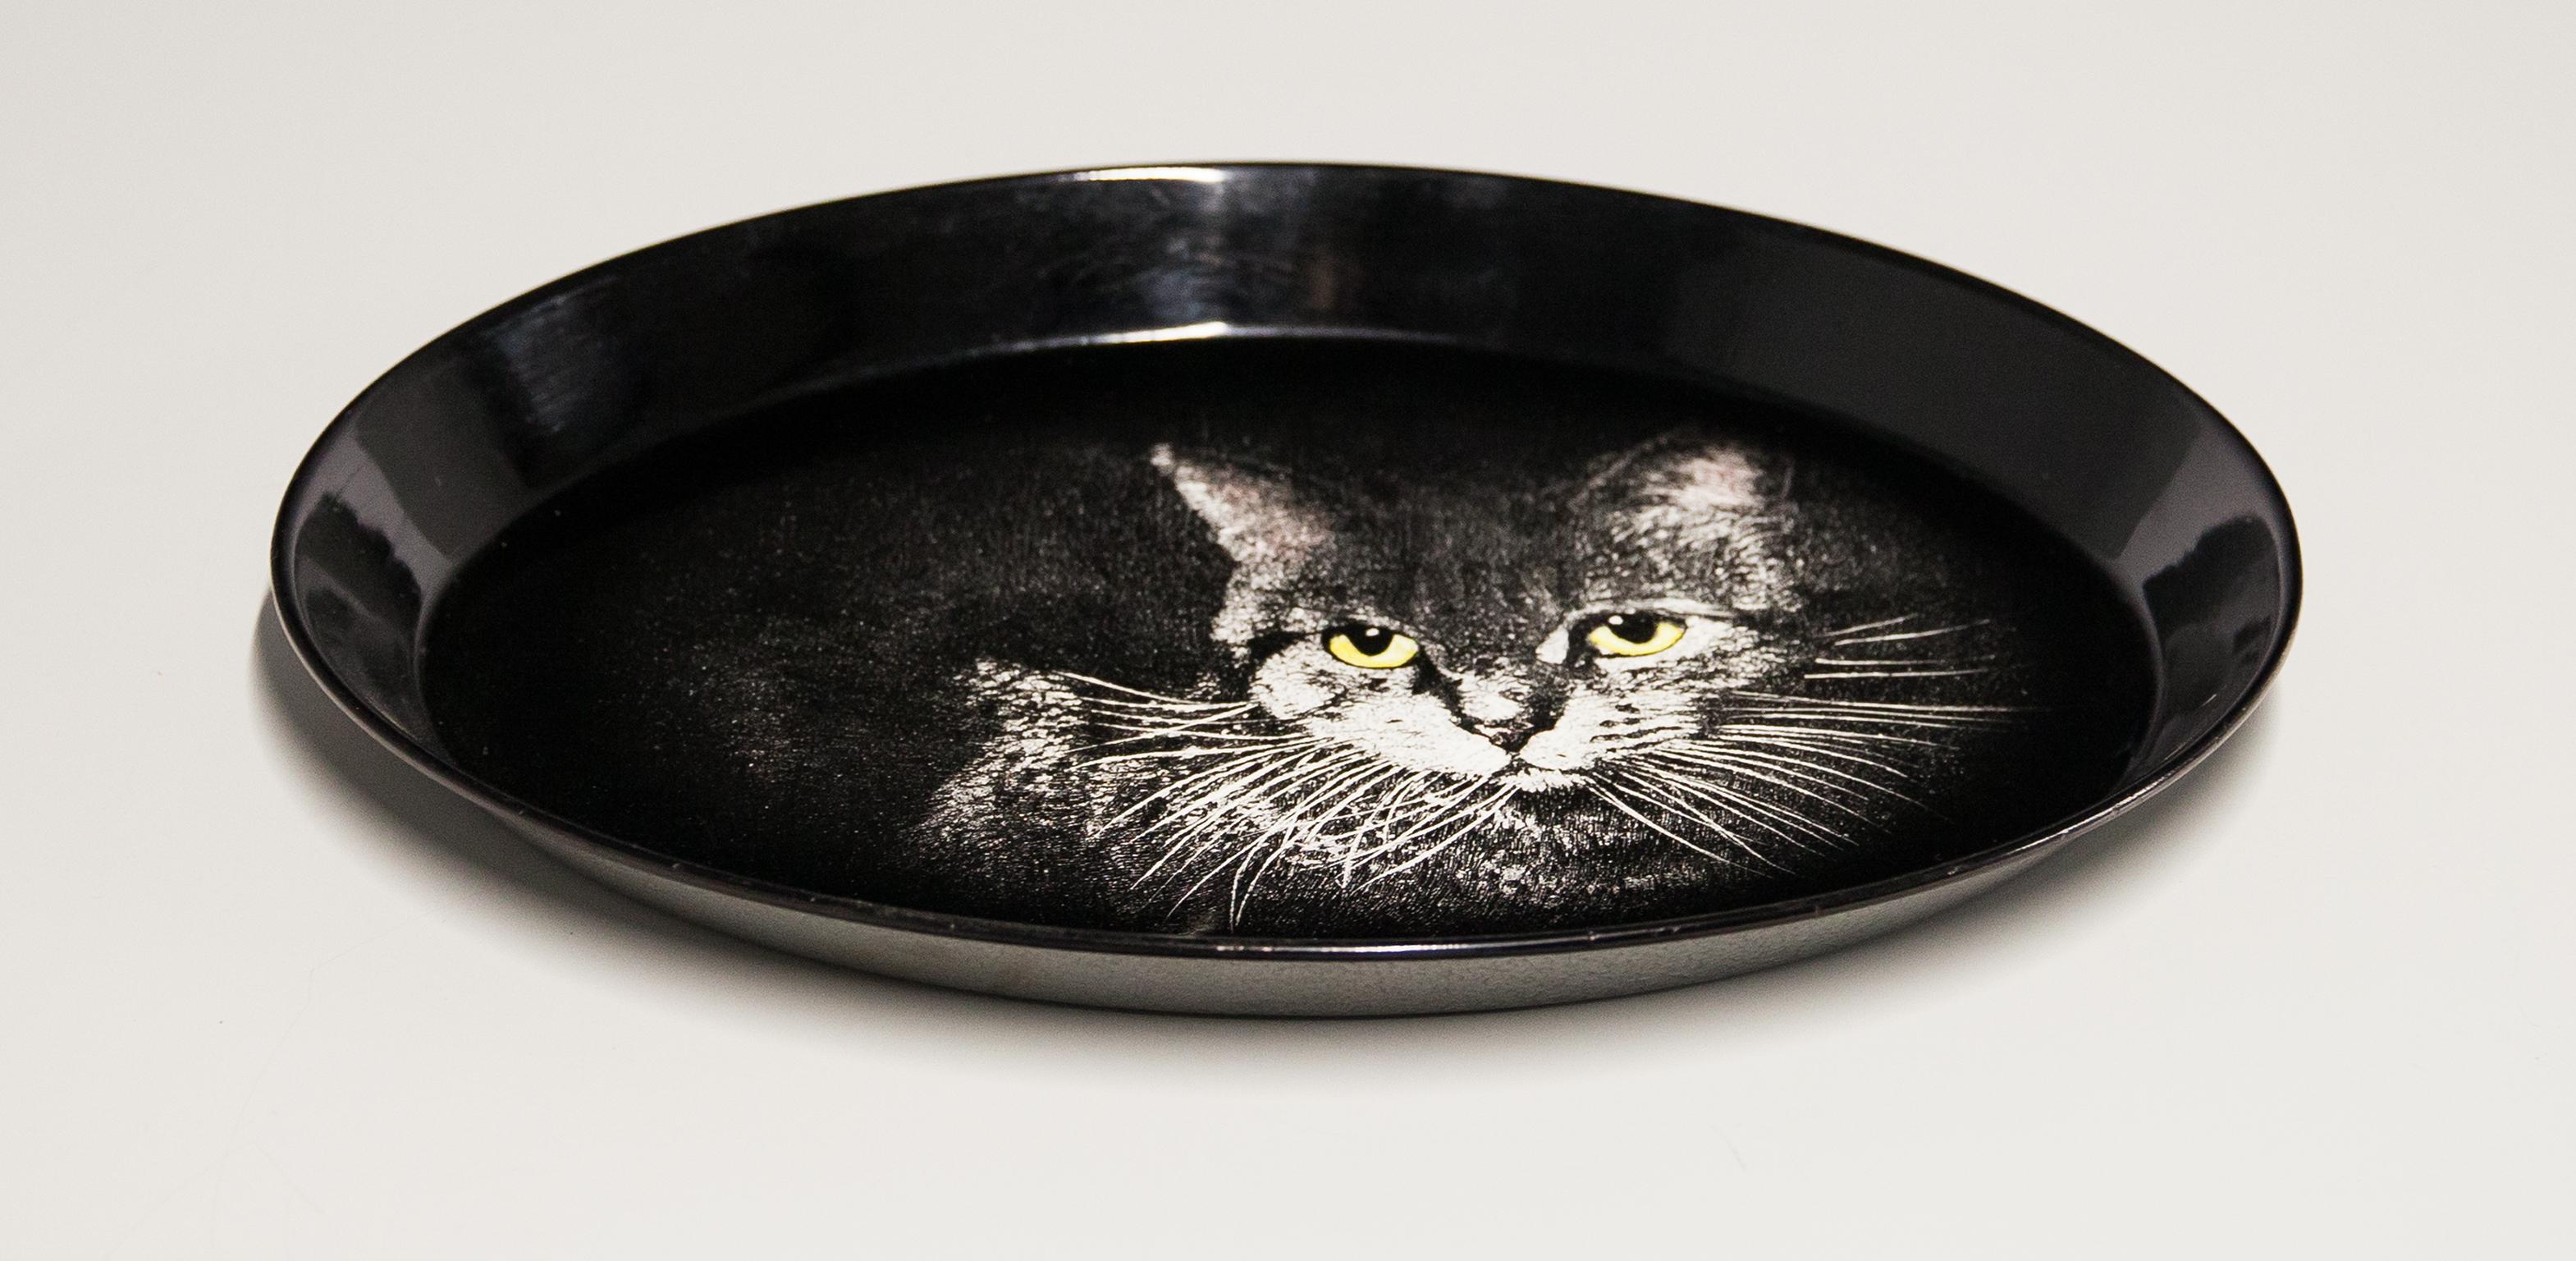 A fabulous light-colored and black version of the tromp l’oeil Tabby cat designed by Piero Fornasetti. Originally designed and produced in the mid-1950s as per the Fornasetti catalogue. Original paper label on the back. Ideal as a kitchen or dining